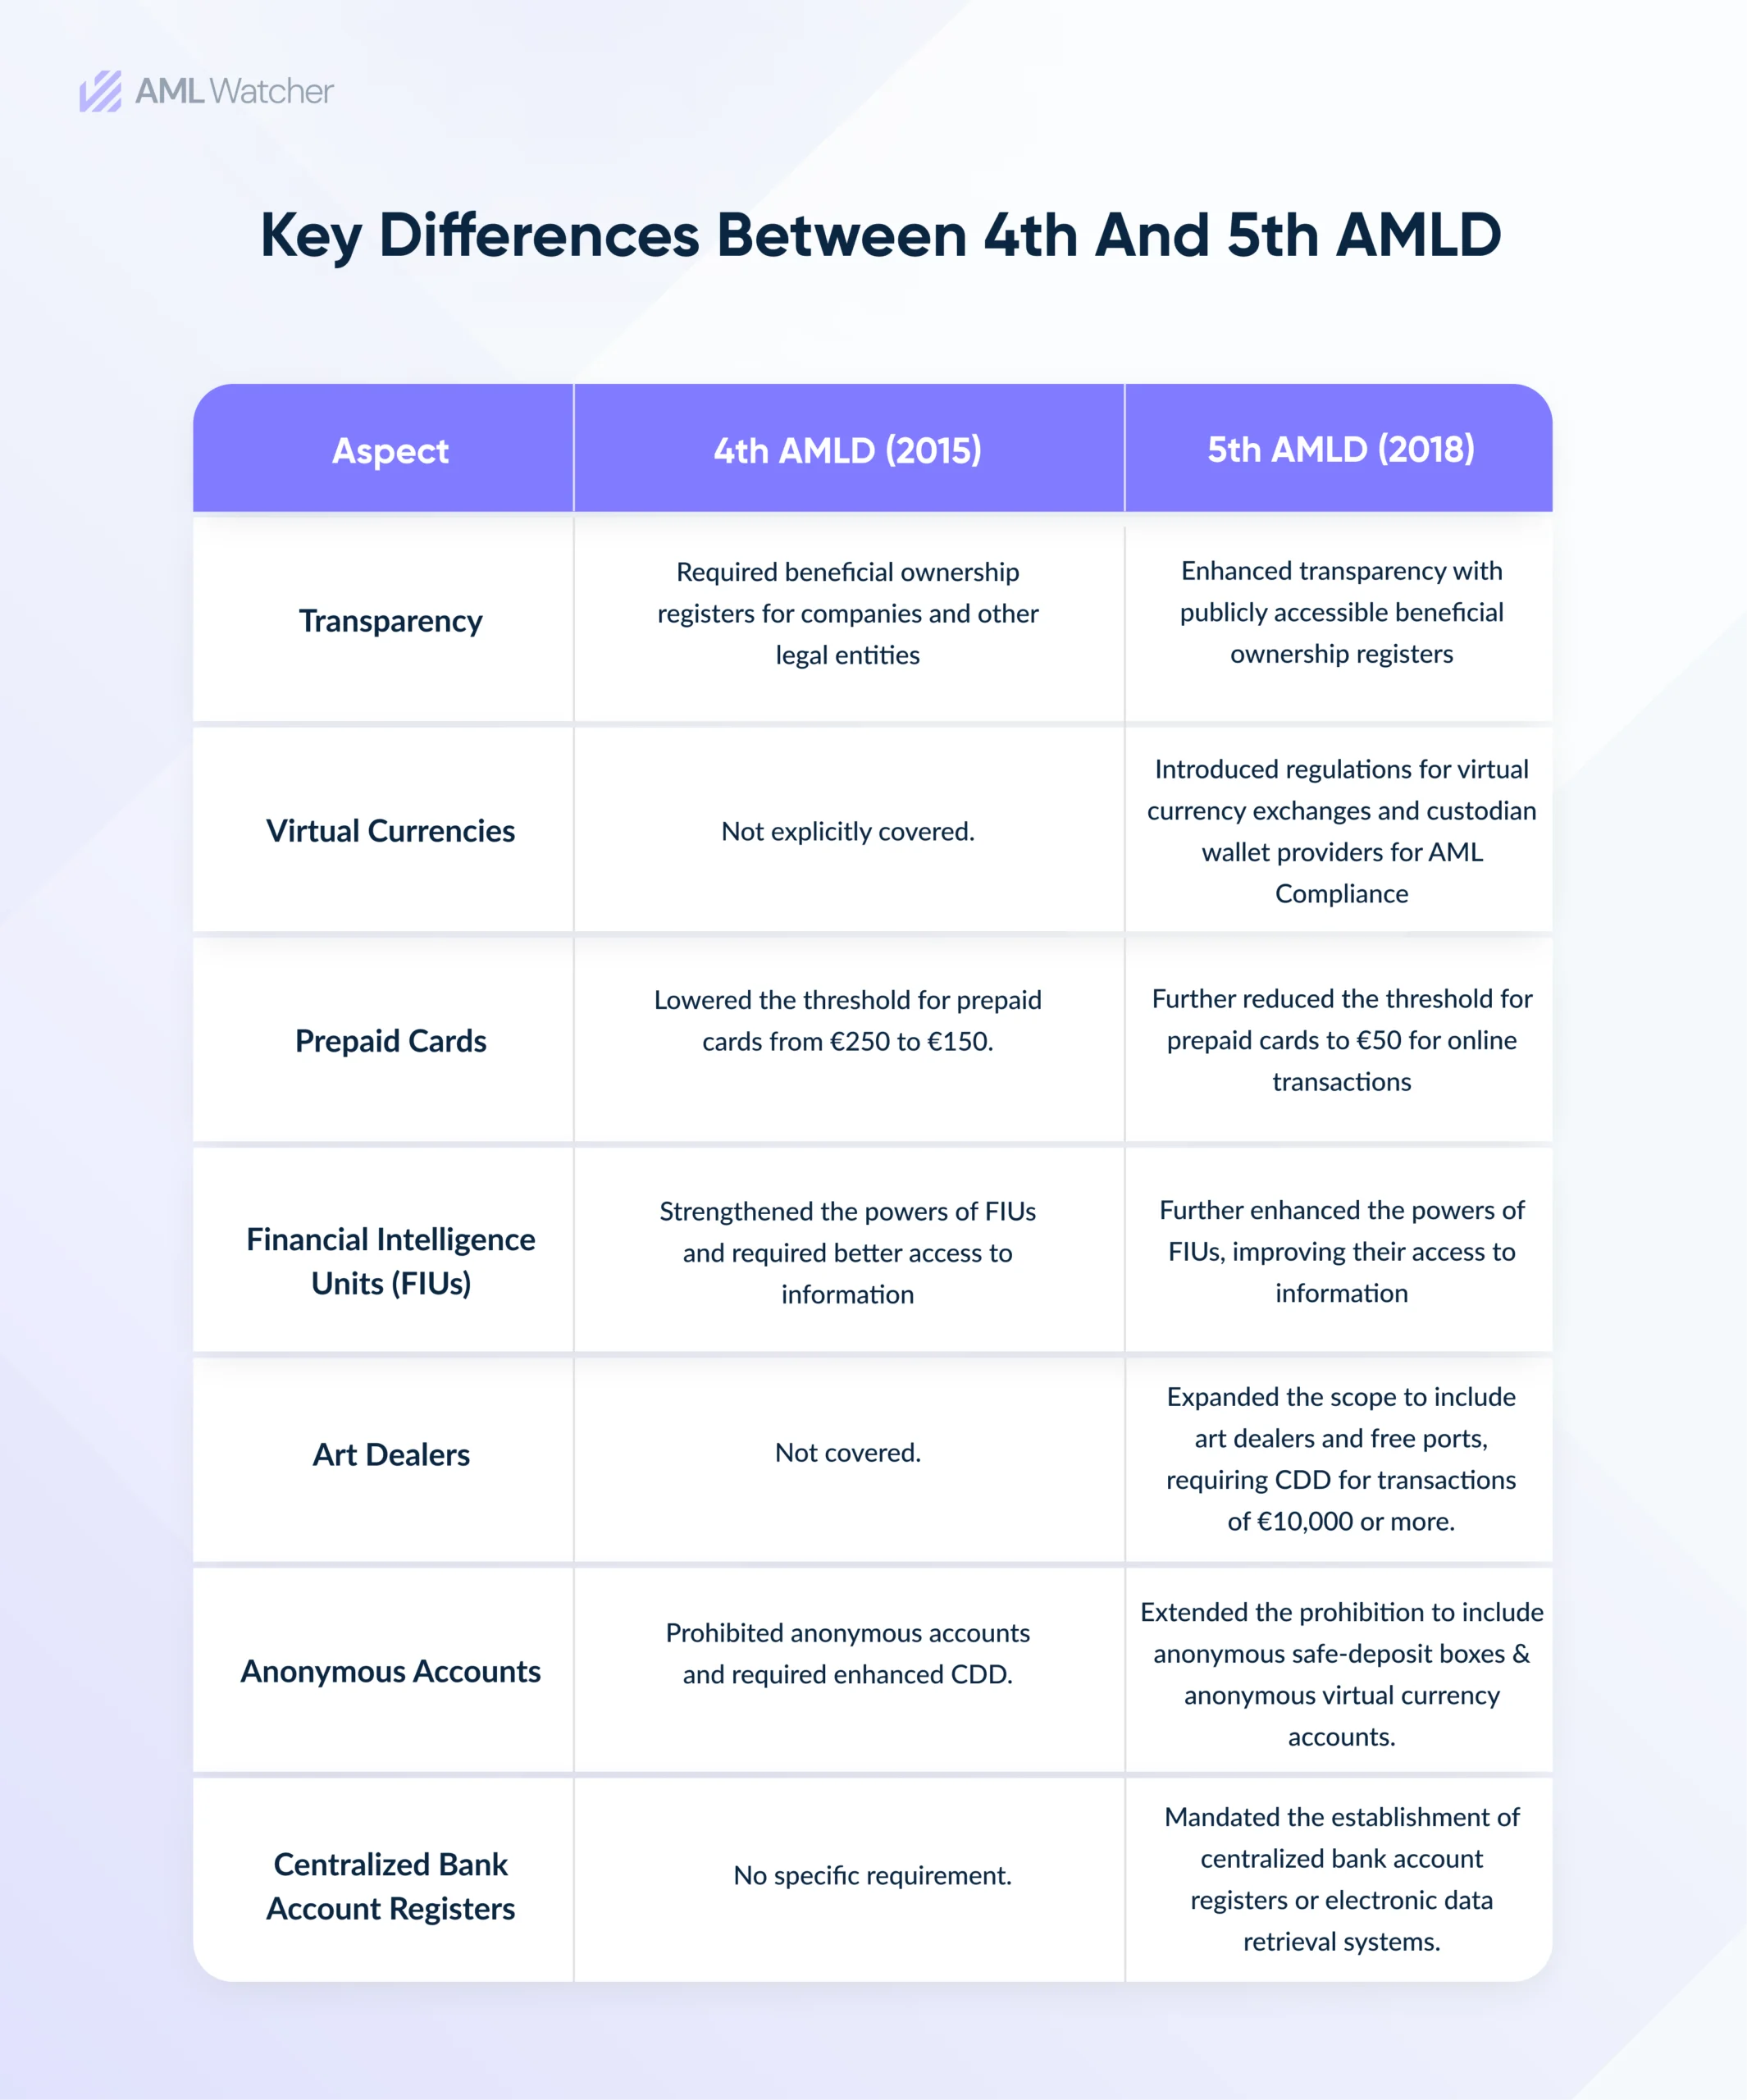 The image shows Key Differences between 4th AMLD (2015) and 5th AMLD (2018)